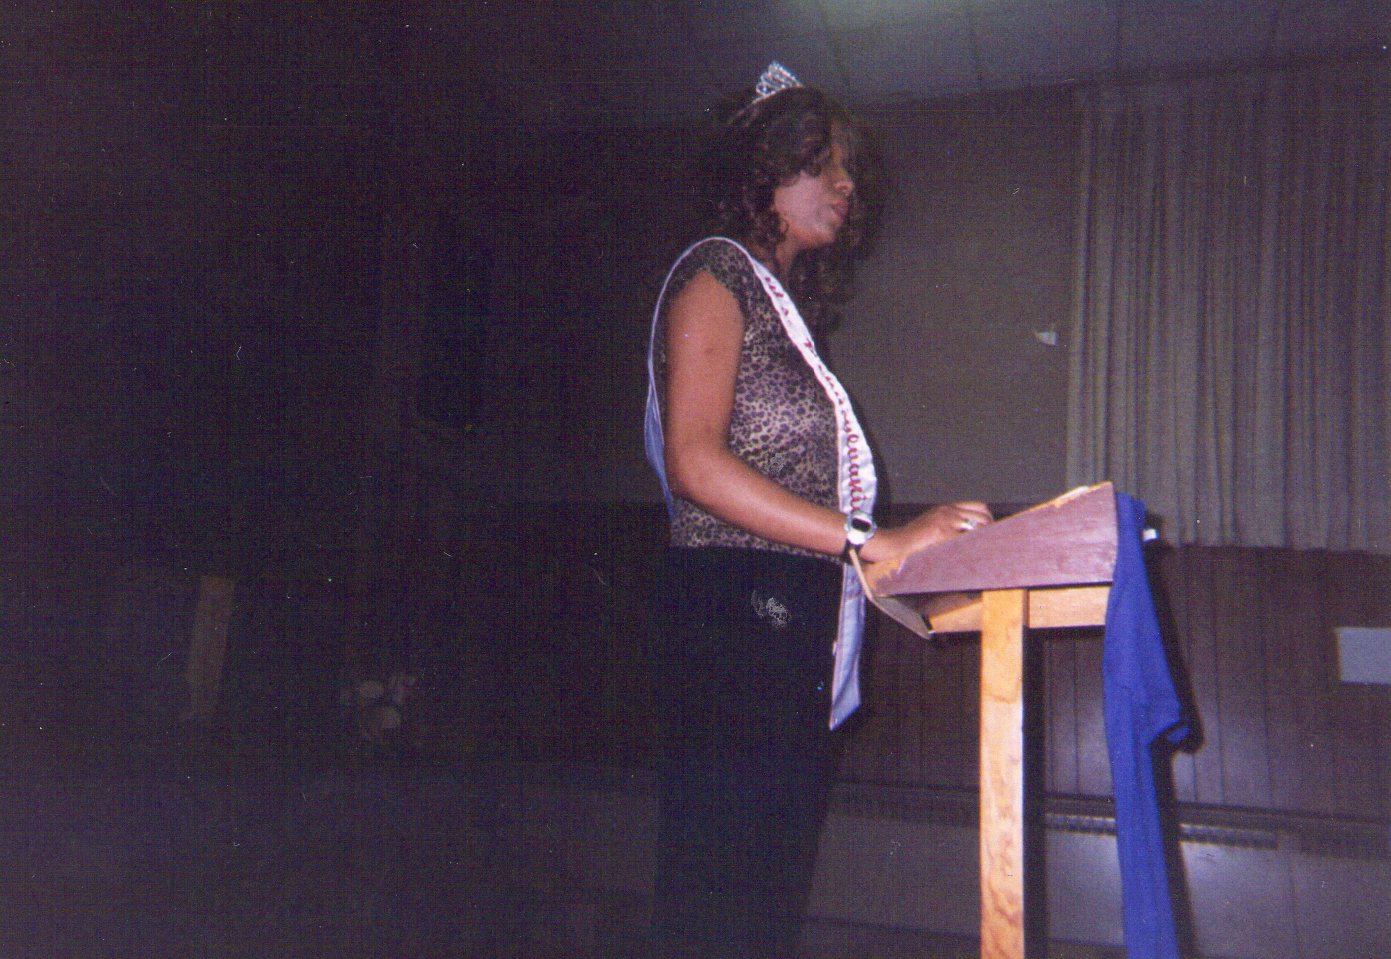 Ms. Pennsylvania 2004 Maria Frisby was a special guest and speaker at a Kids' at Risk event in Harrisburg, PA.